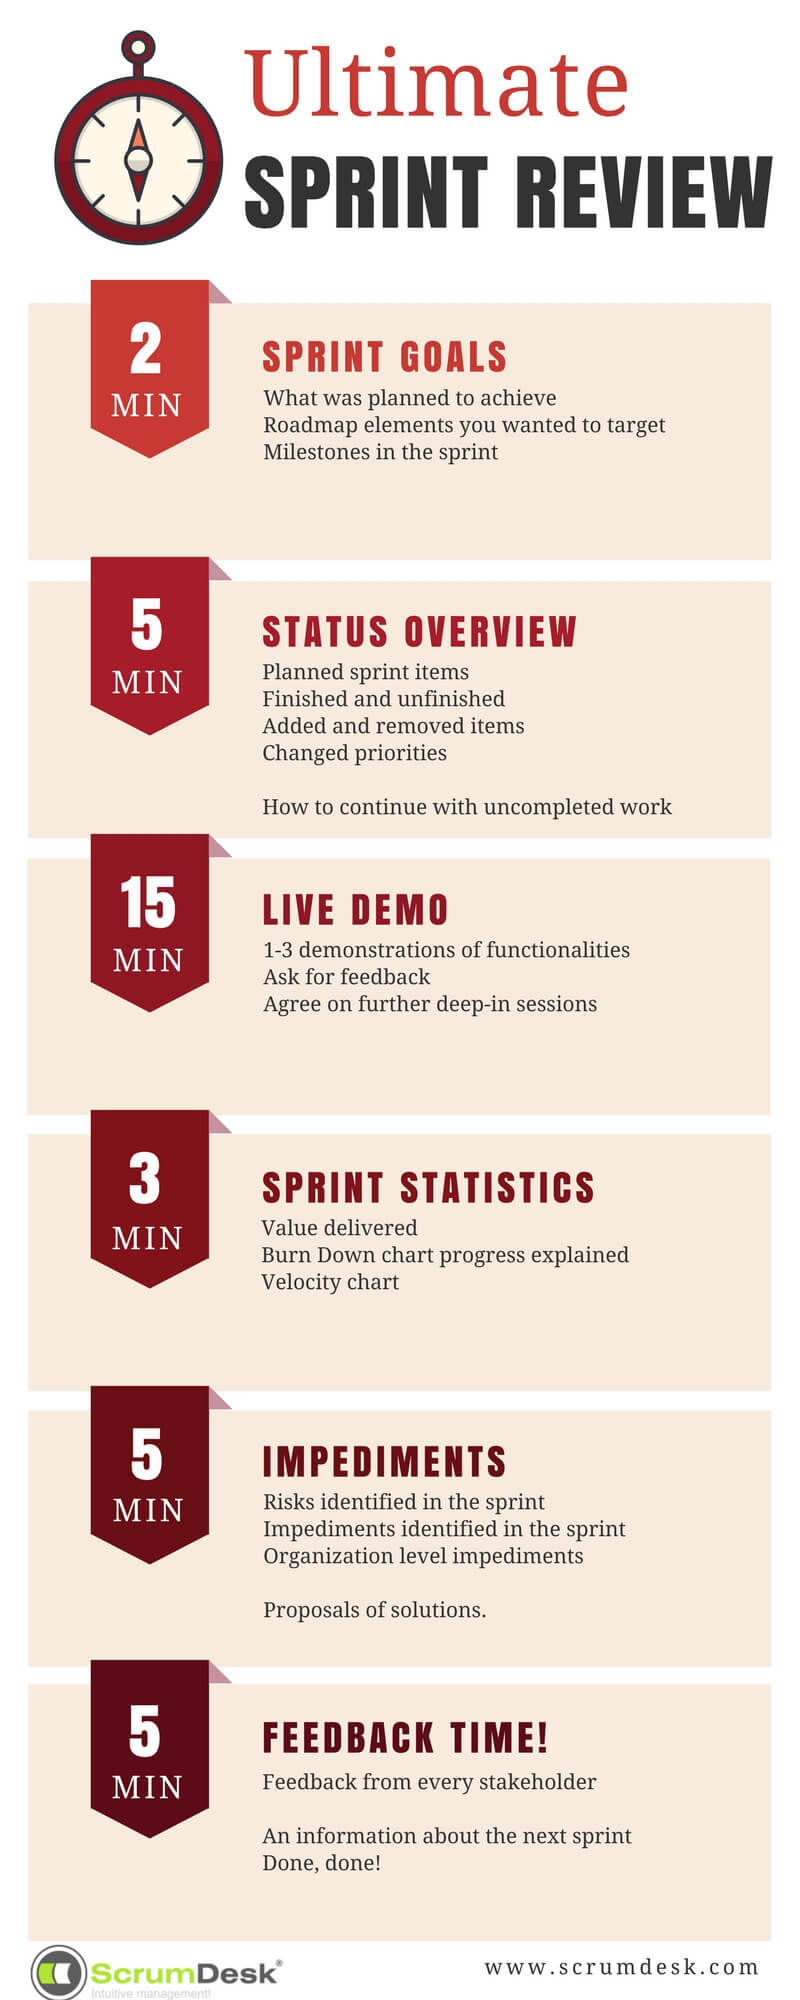 The Guide for Ultimate Sprint Review | ScrumDesk, Meaningful Agile